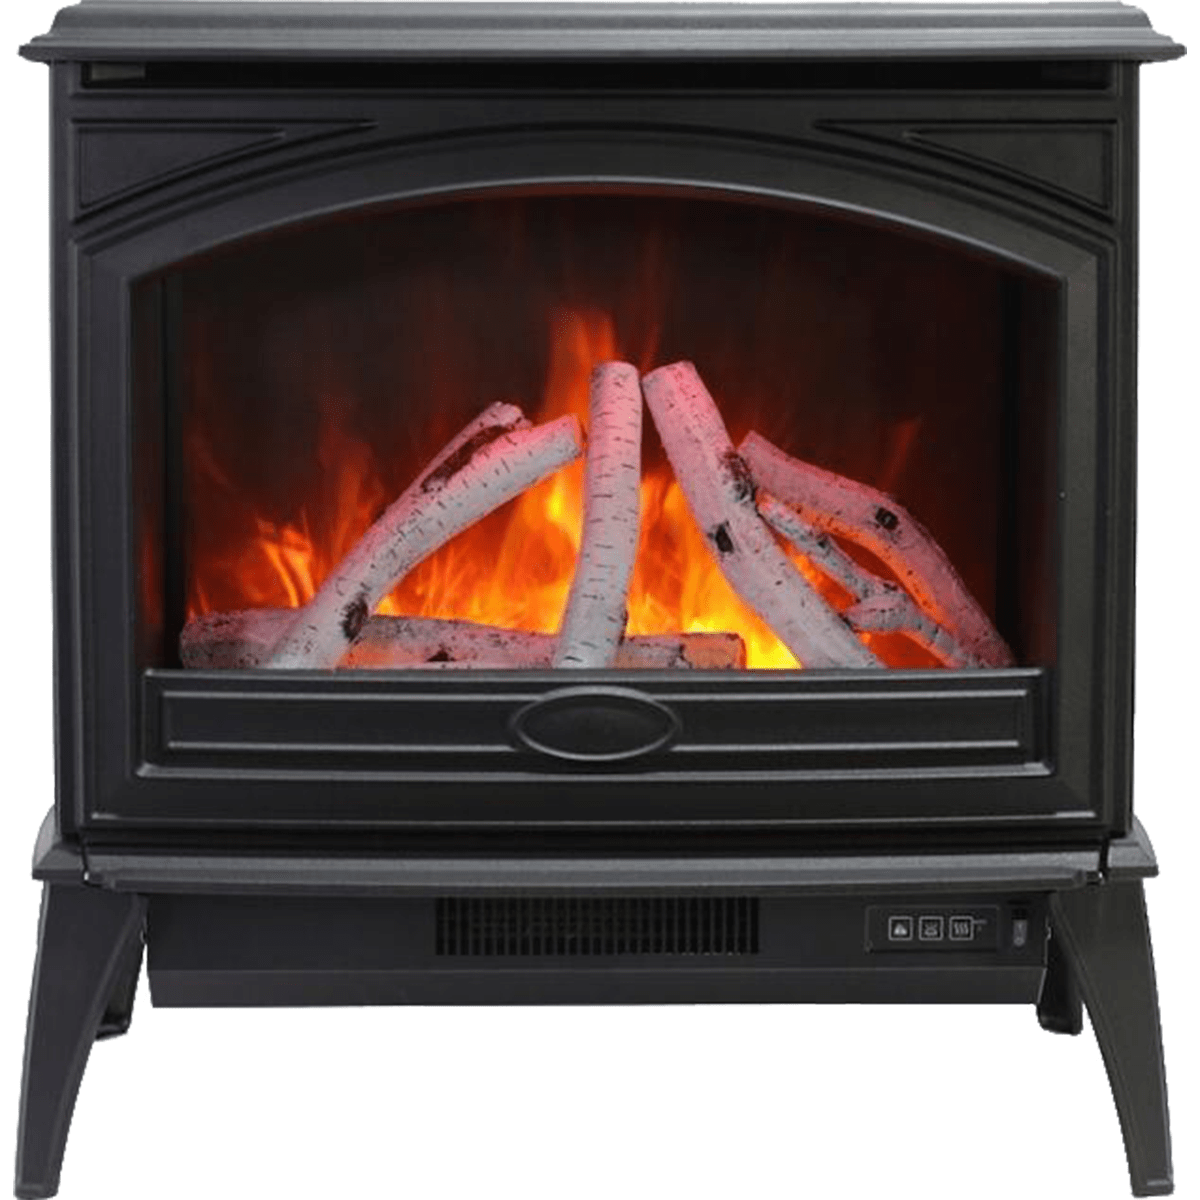 Sierra Flame Freestanding Electric Stove - 70-in.